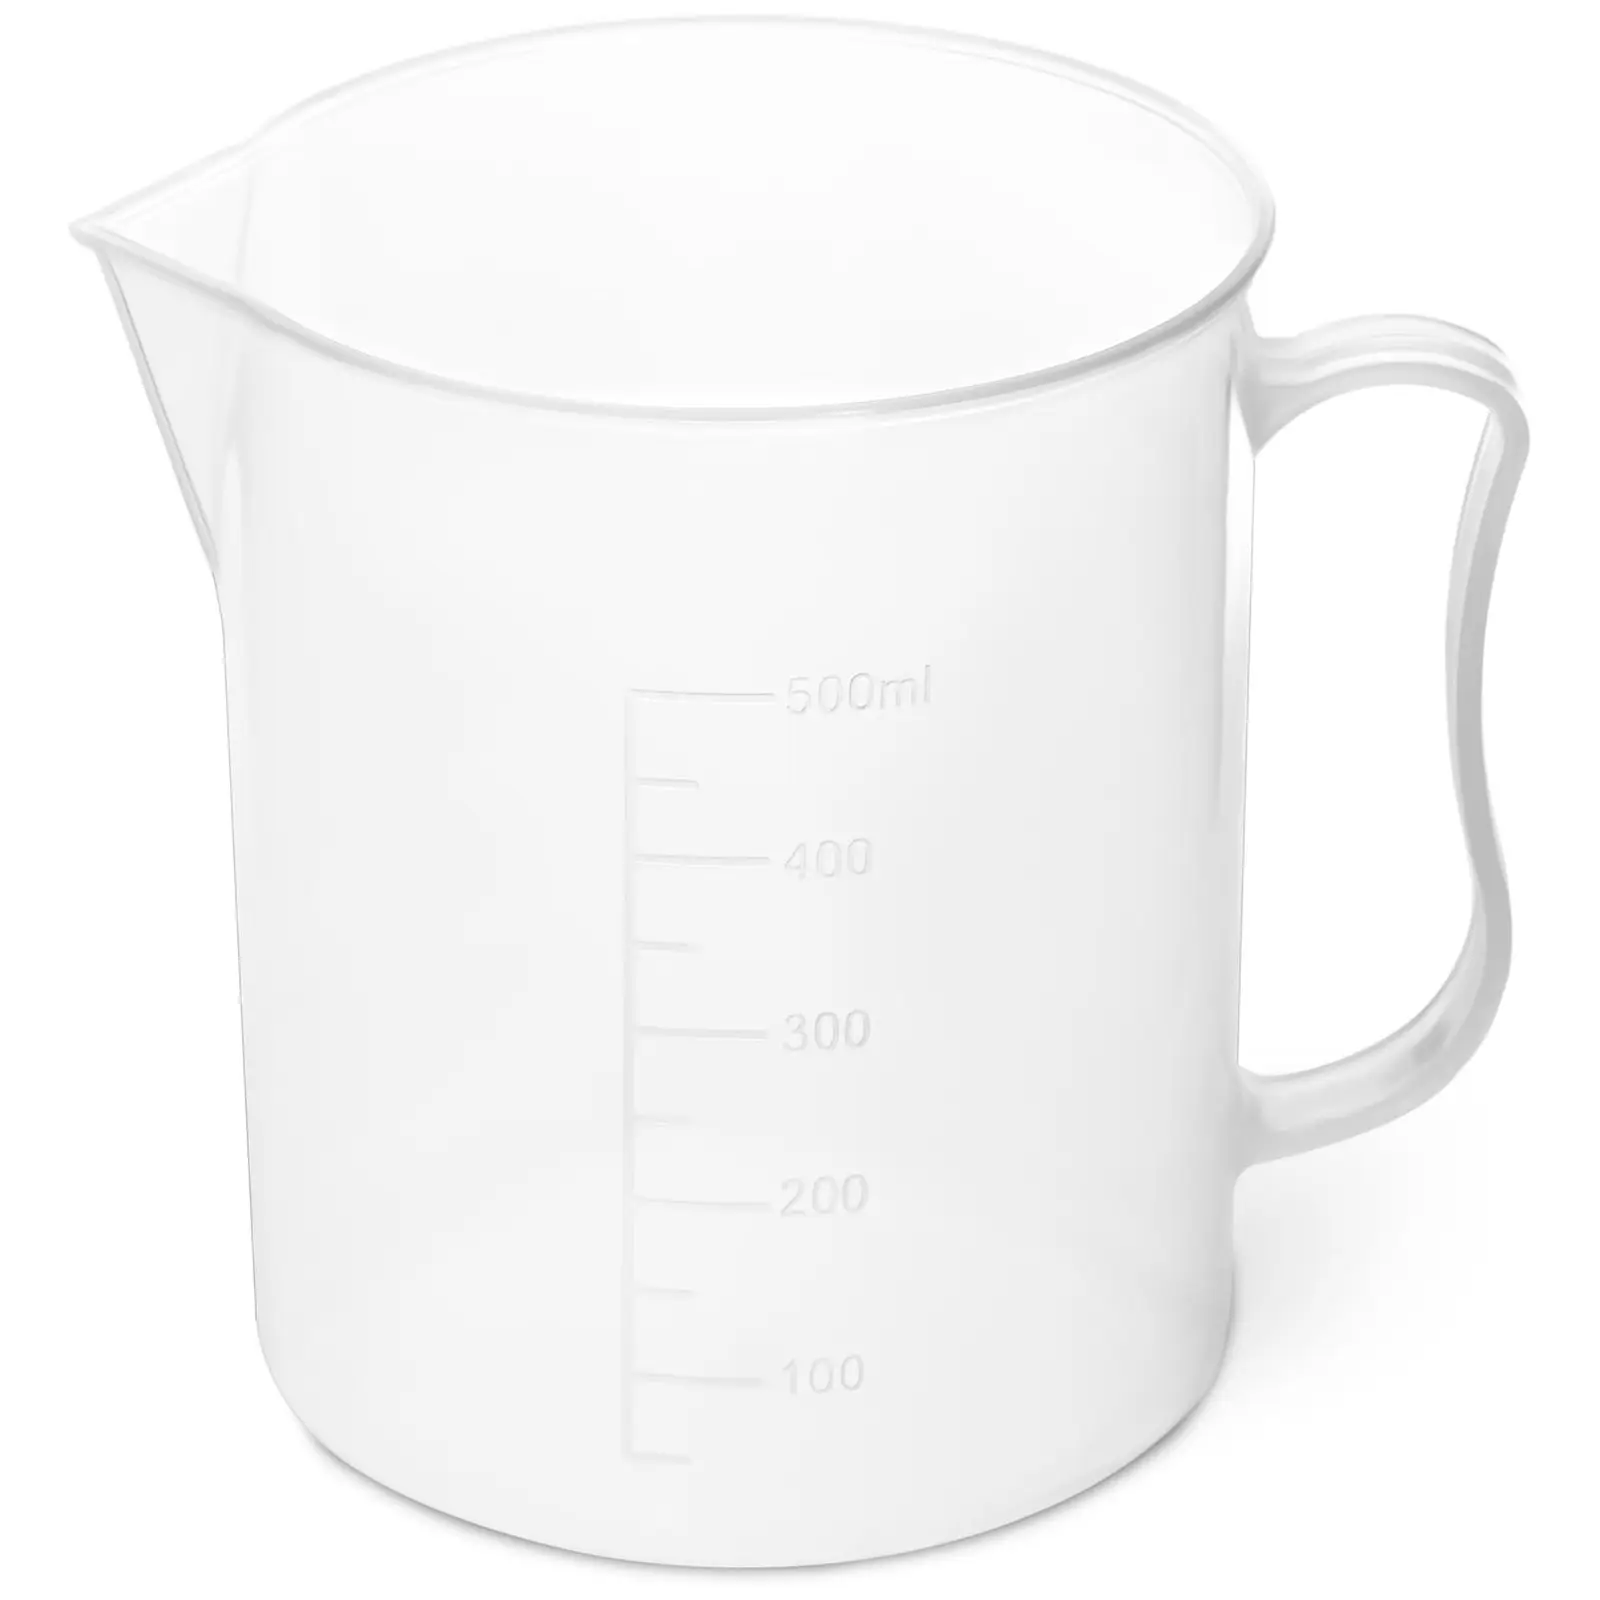 Laboratory Beaker - 10 pcs. - 500 ml - with spout and handle